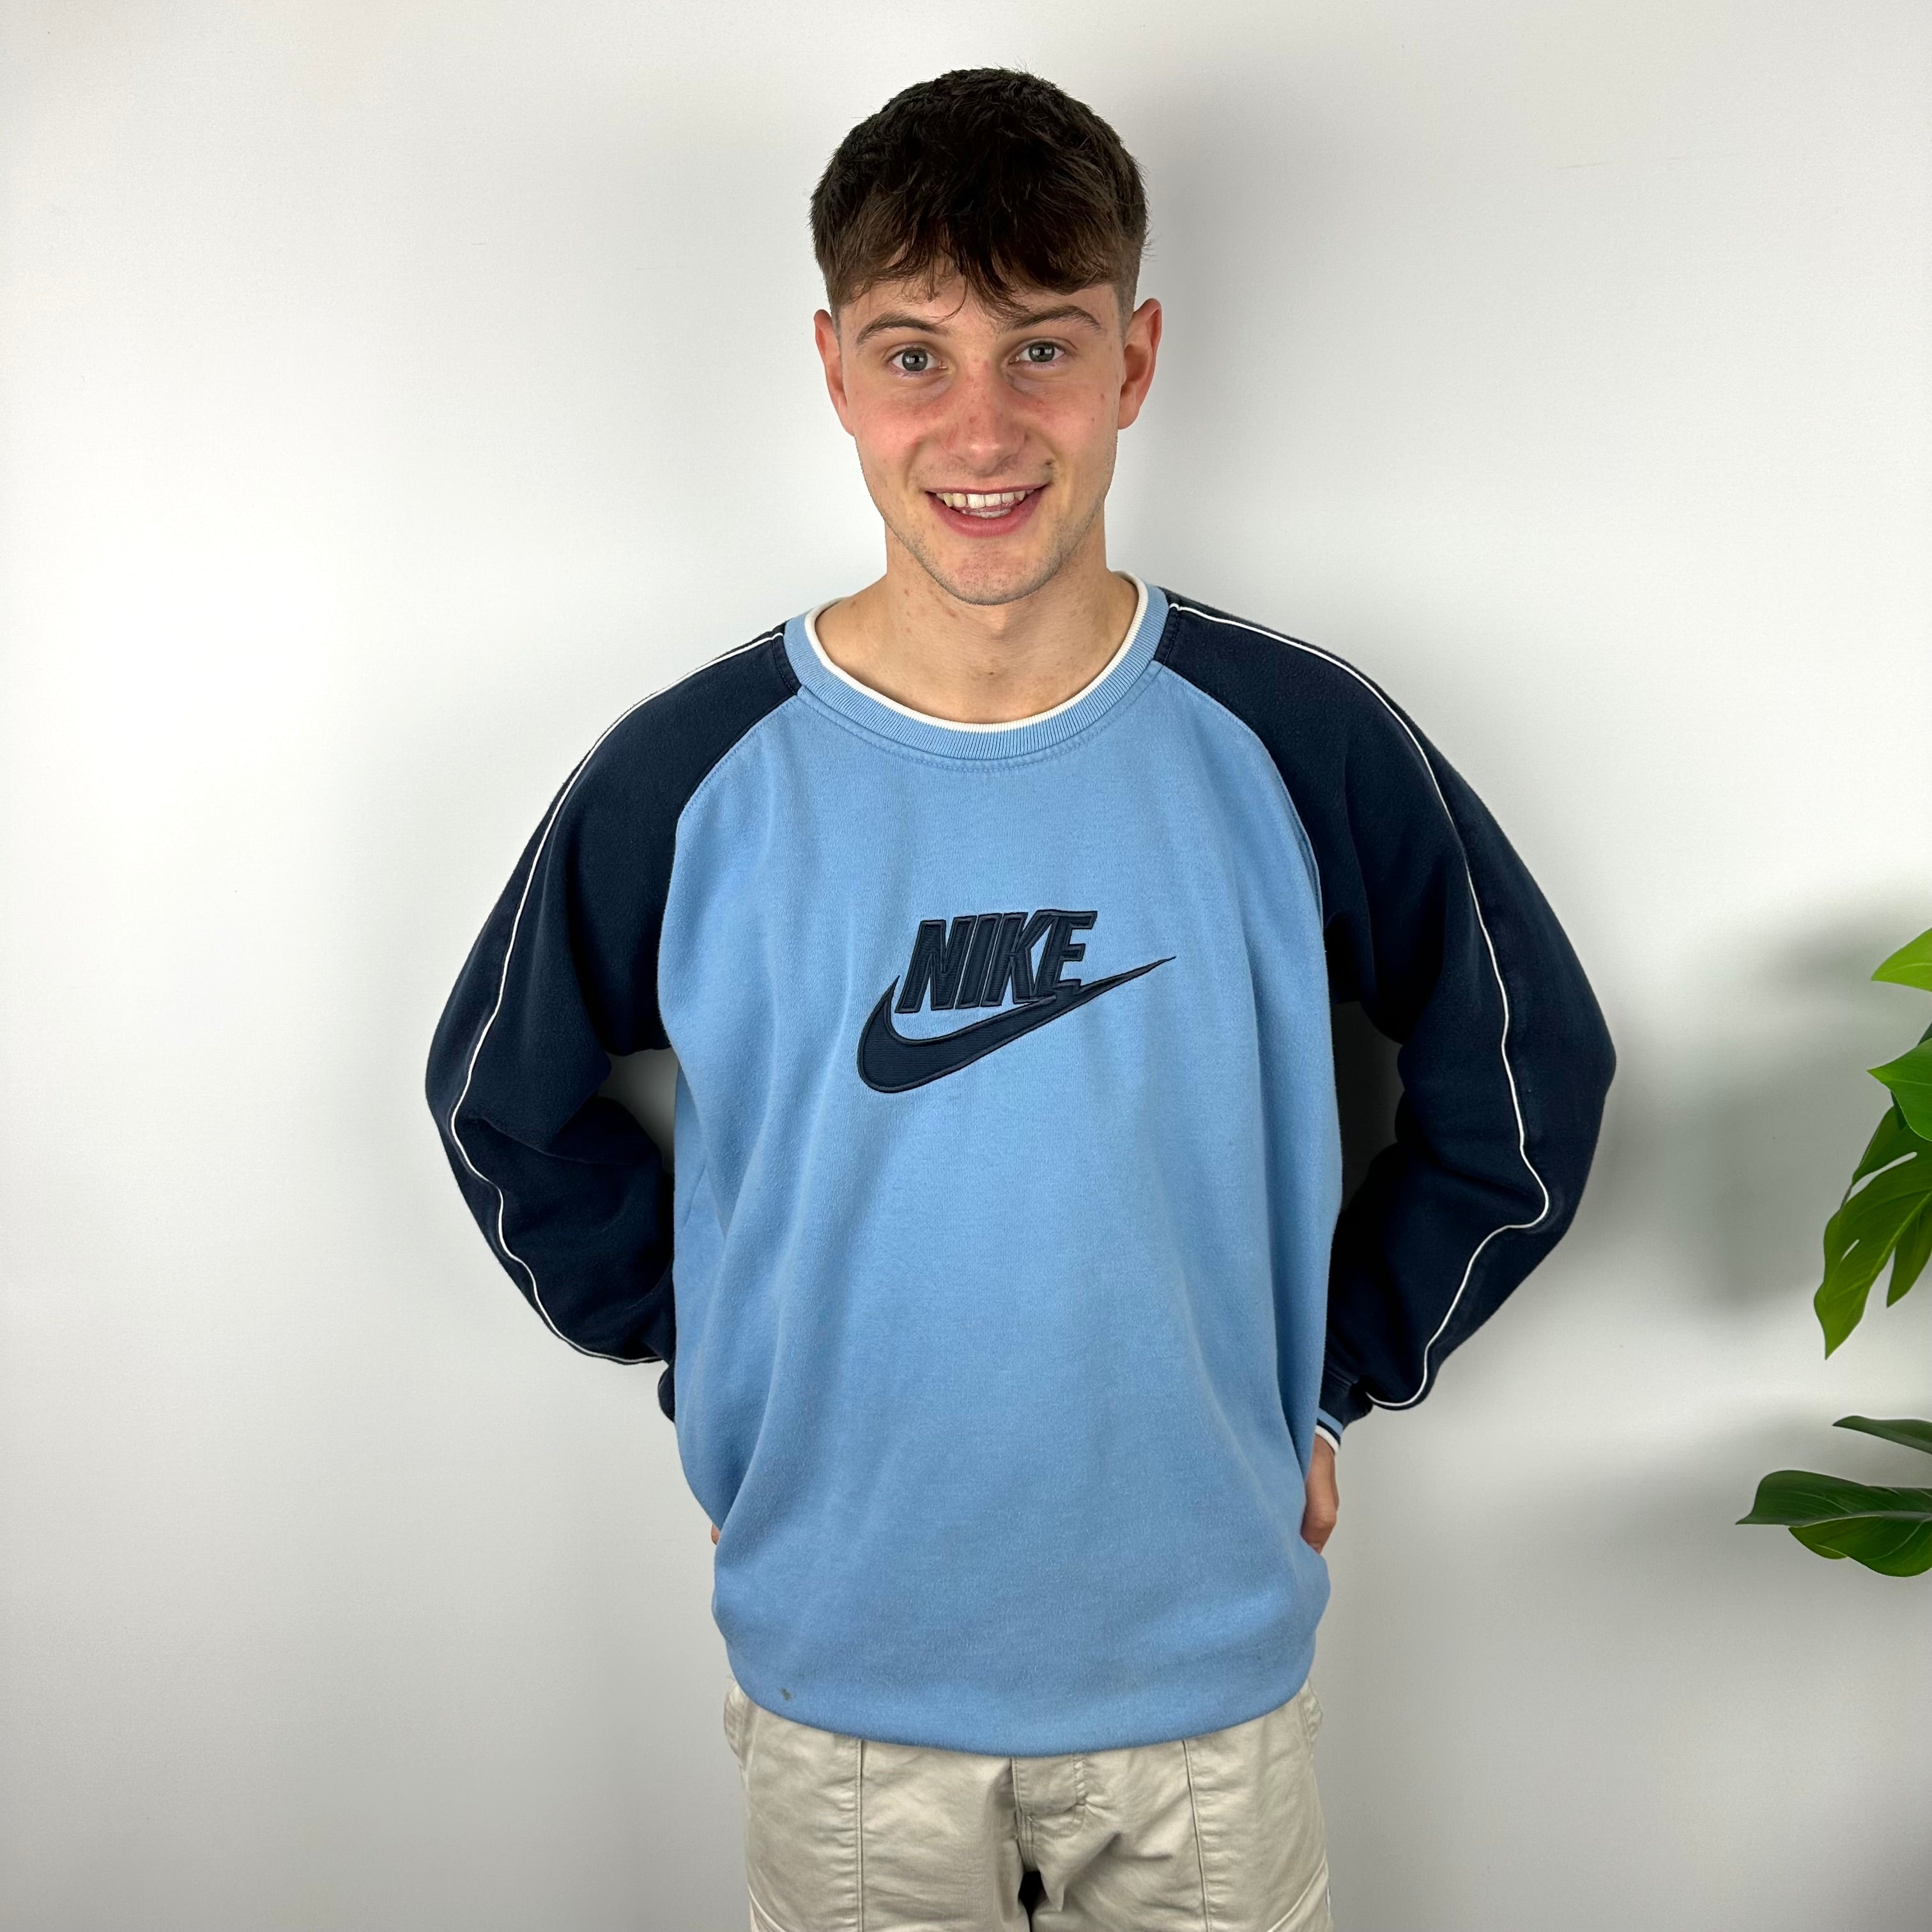 Nike Blue Embroidered Spell Out Sweatshirt (XXL)